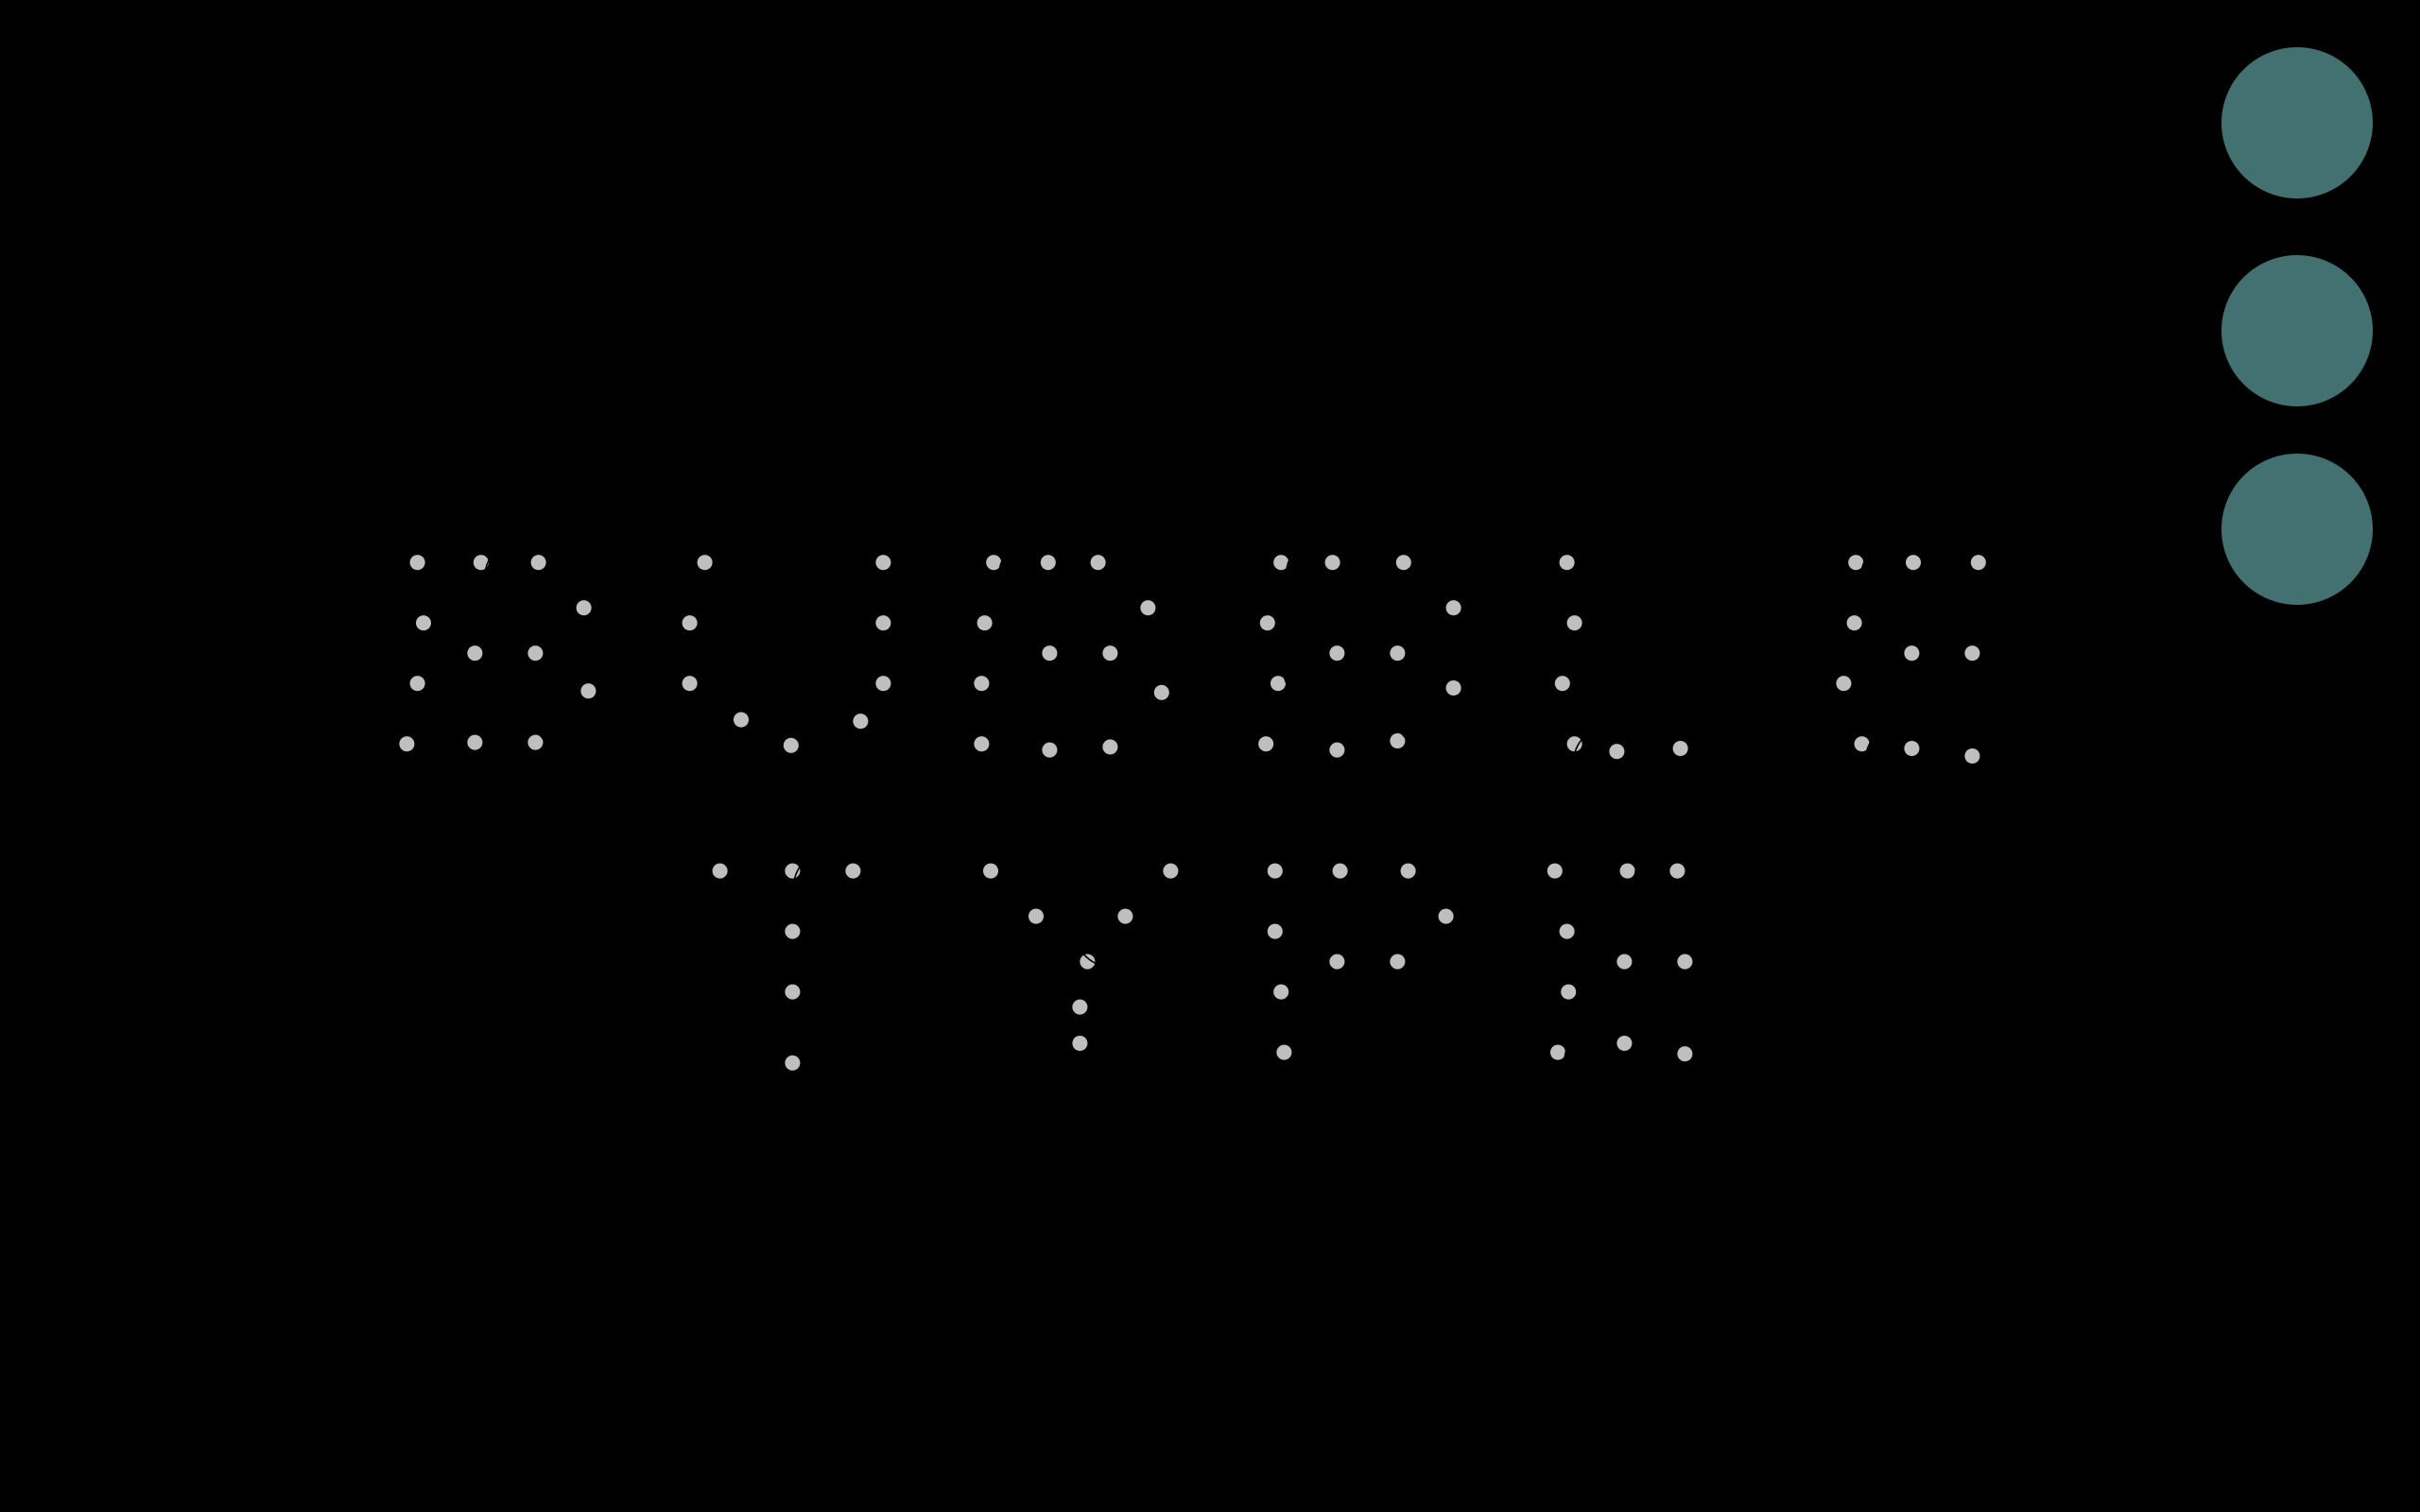 Bubble Type (Stroke) on all black background